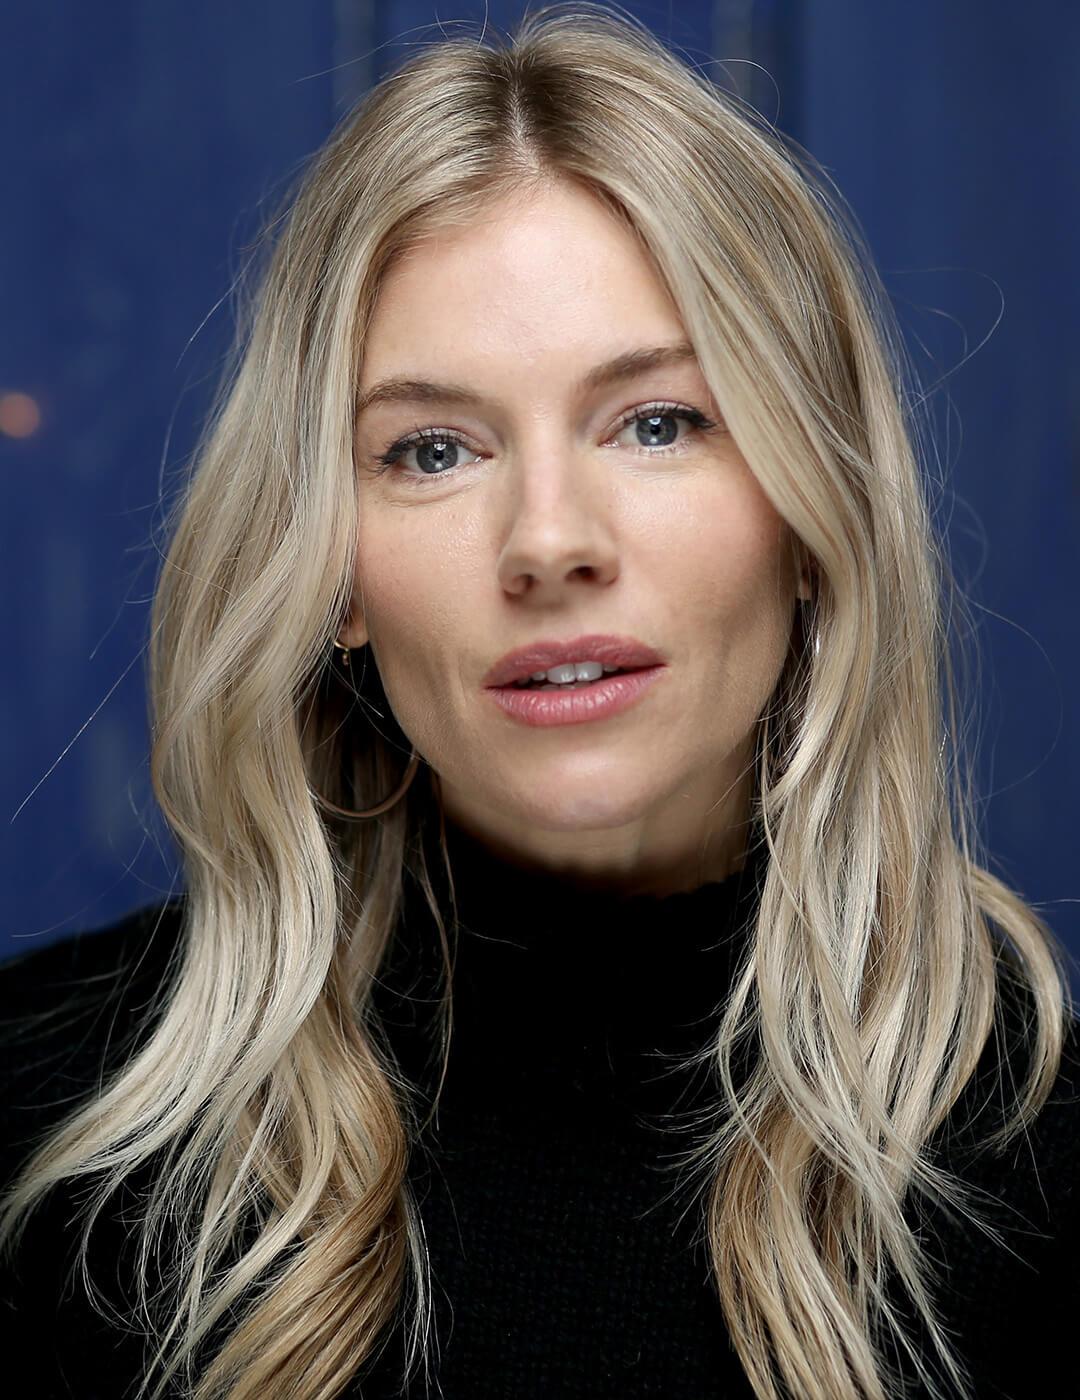 Sienna Miller of 'Wander Darkly' attends the IMDb Studio at Acura Festival Village on location at the 2020 Sundance Film Festival – Day 1 on January 24, 2020 in Park City, Utah.